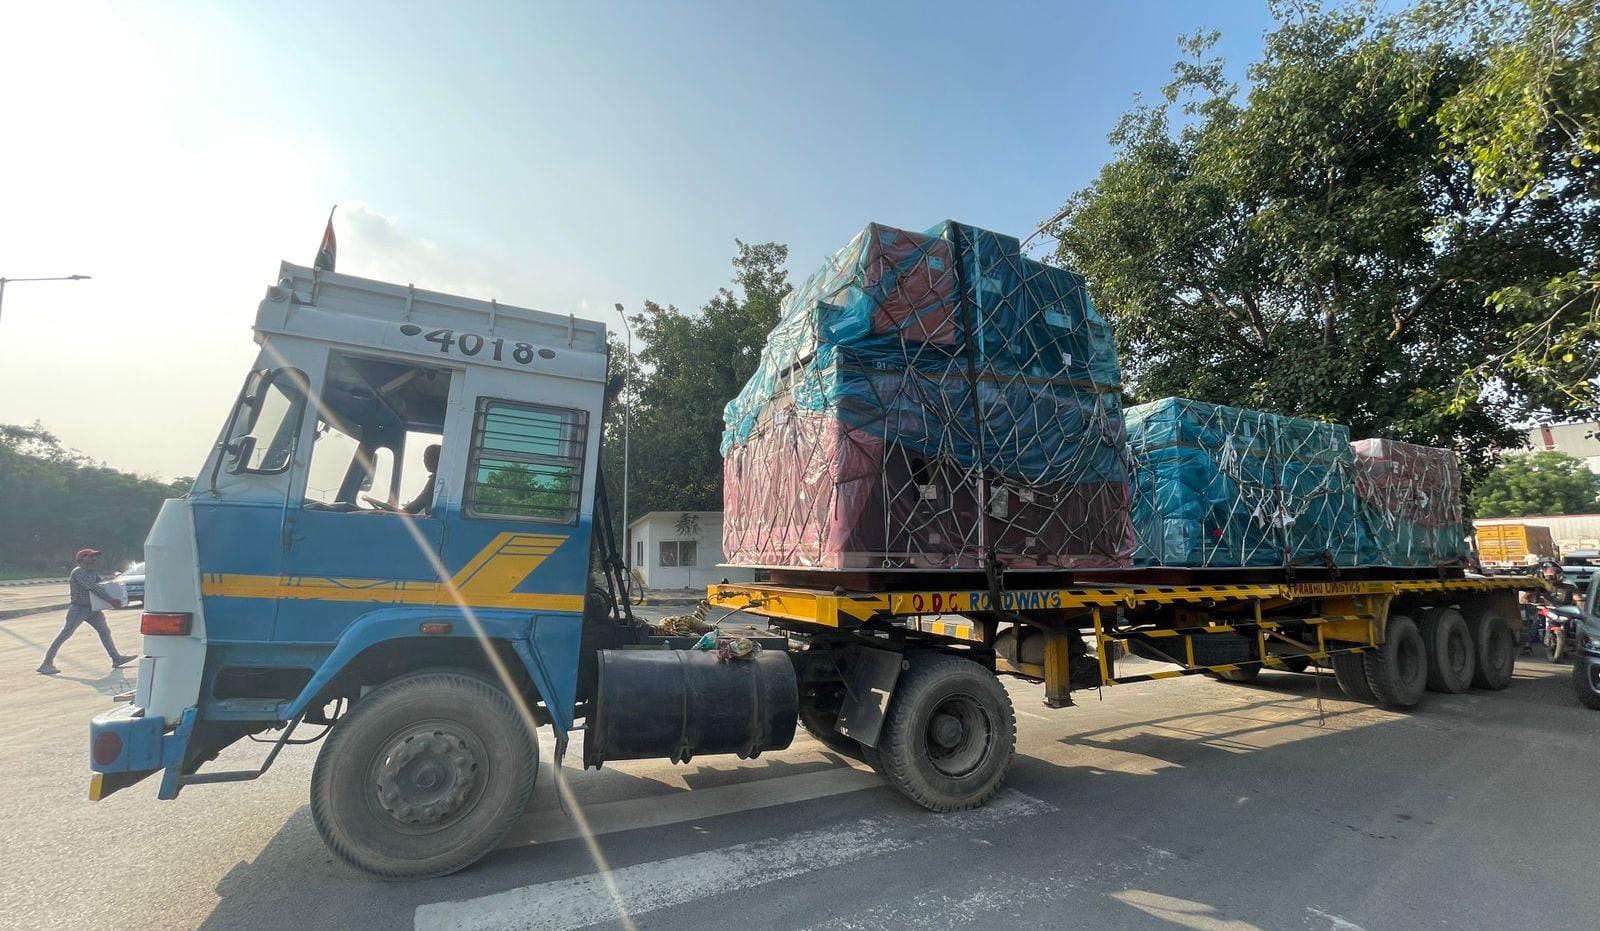 First batch of Race Bikes & Equipment Cargo Shipment lands in India & reaches BIC